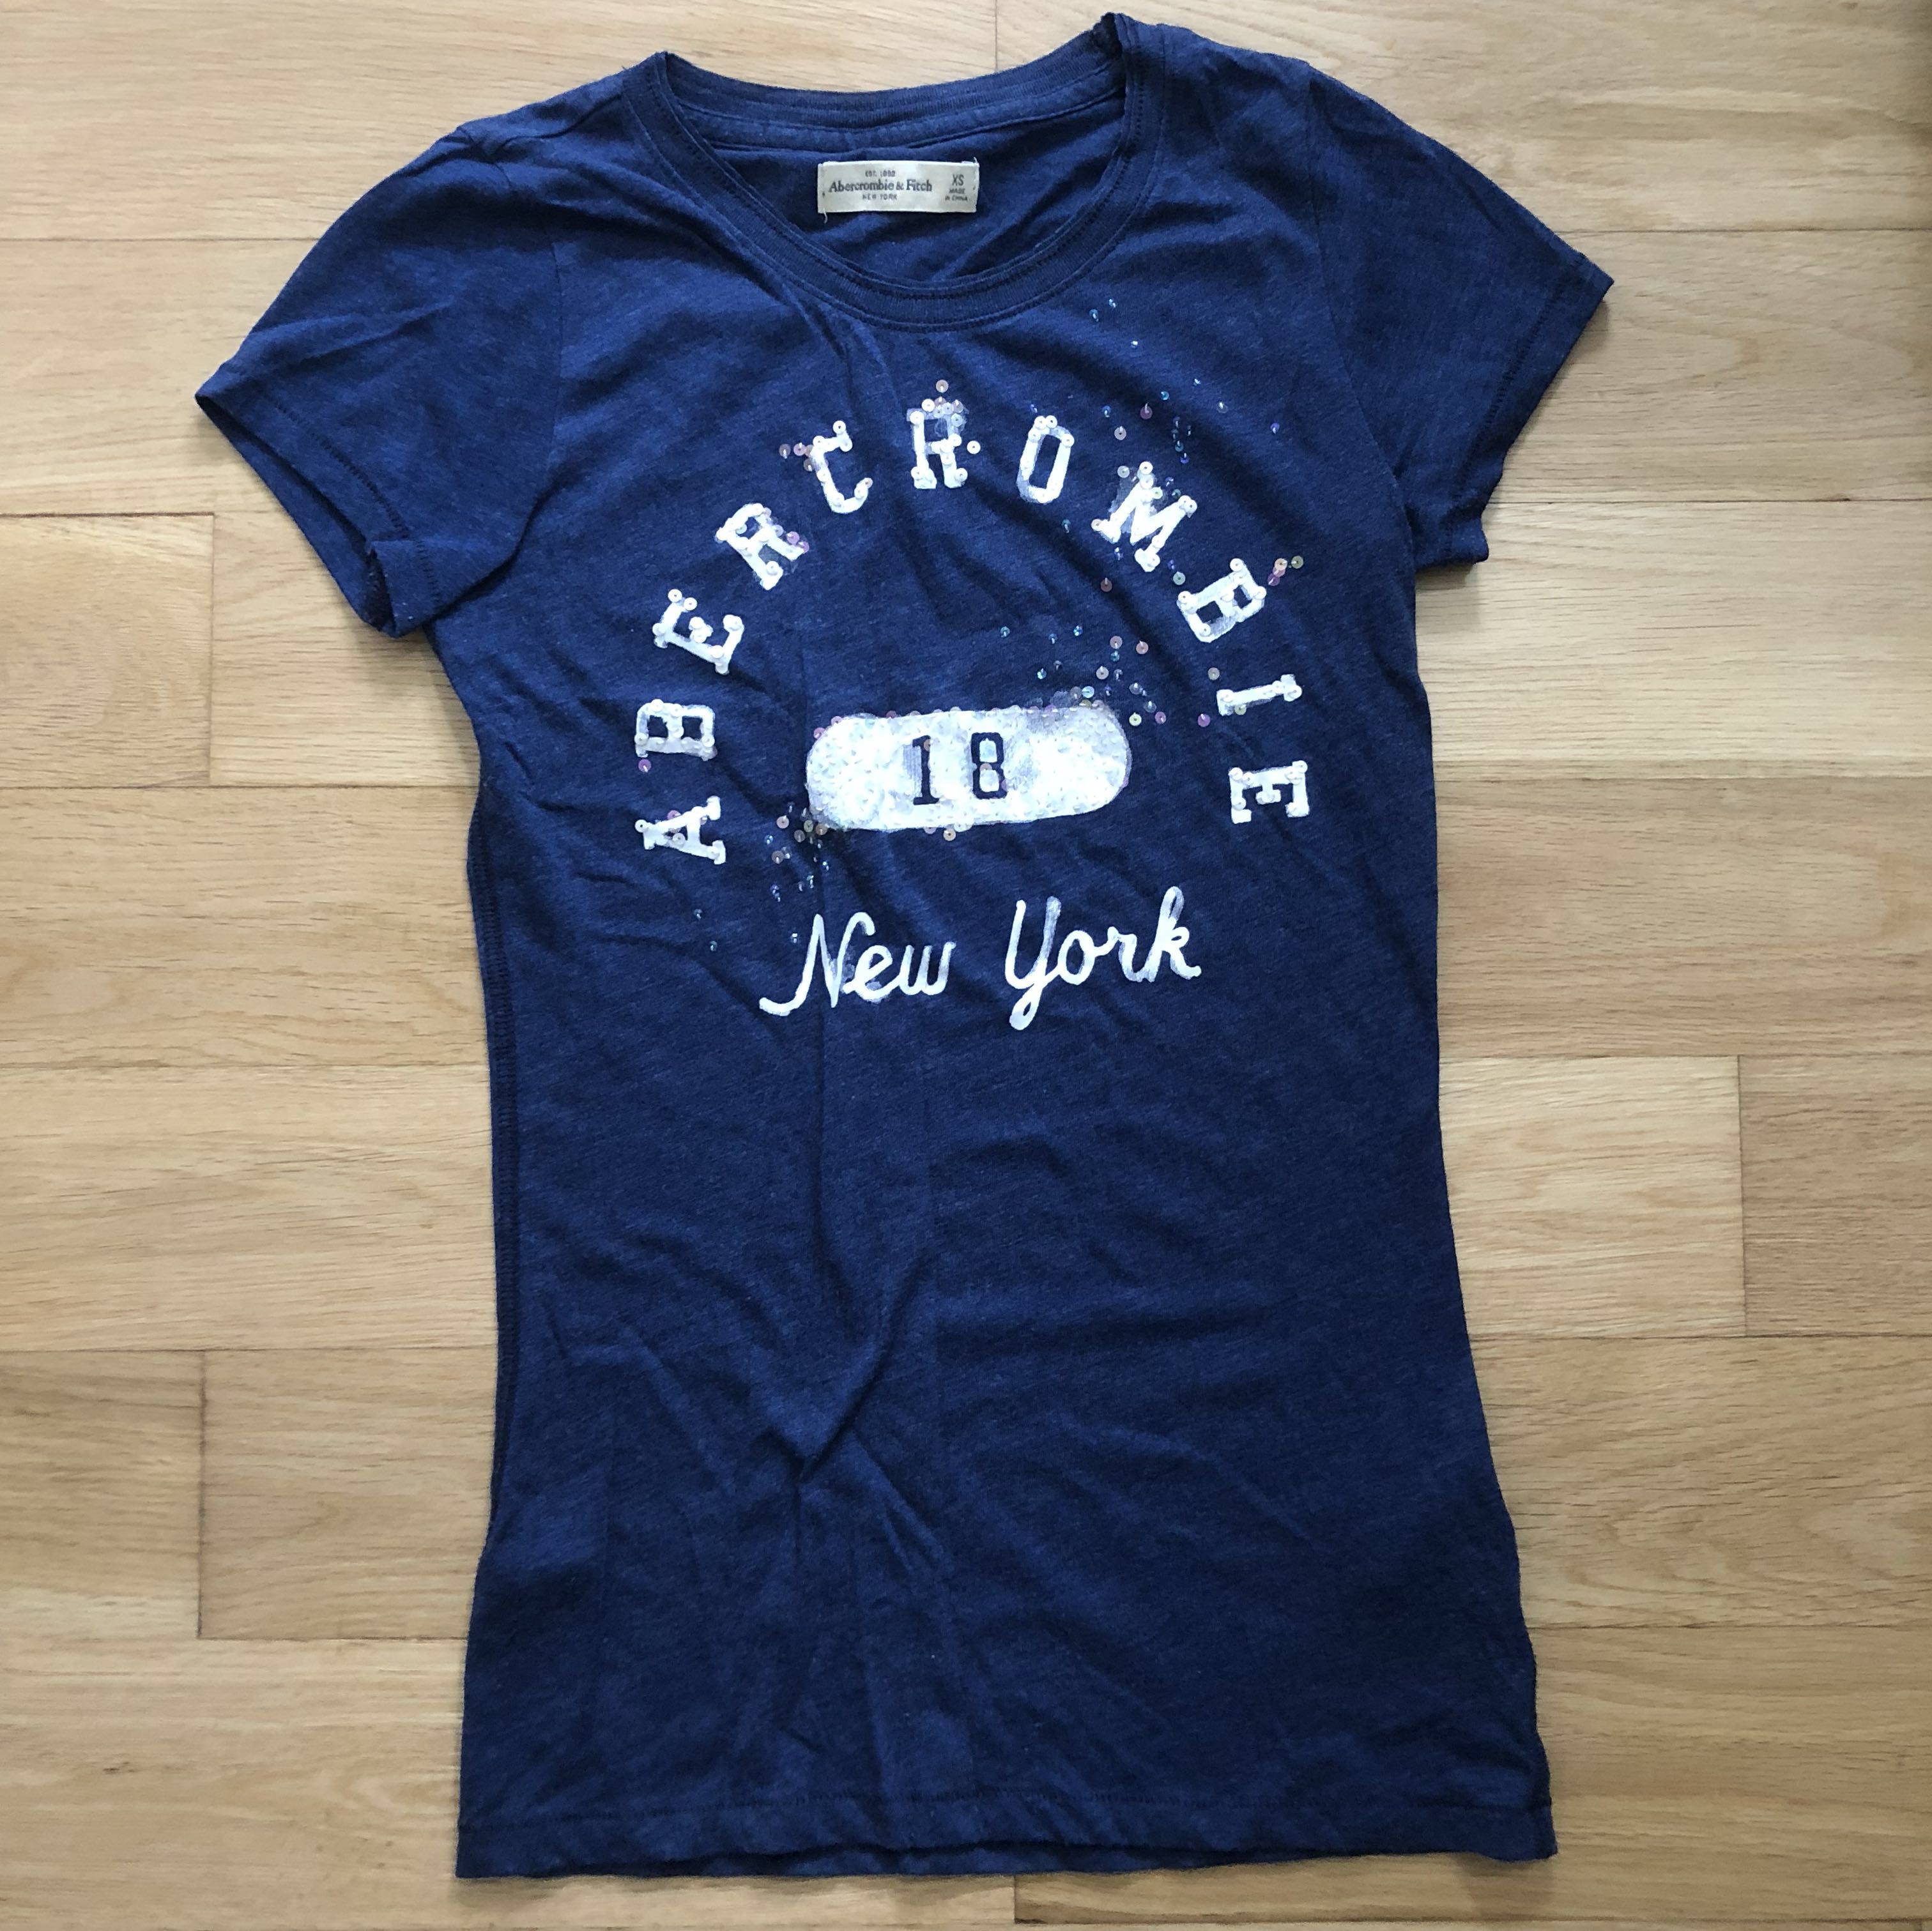 abercrombie and fitch t shirts womens